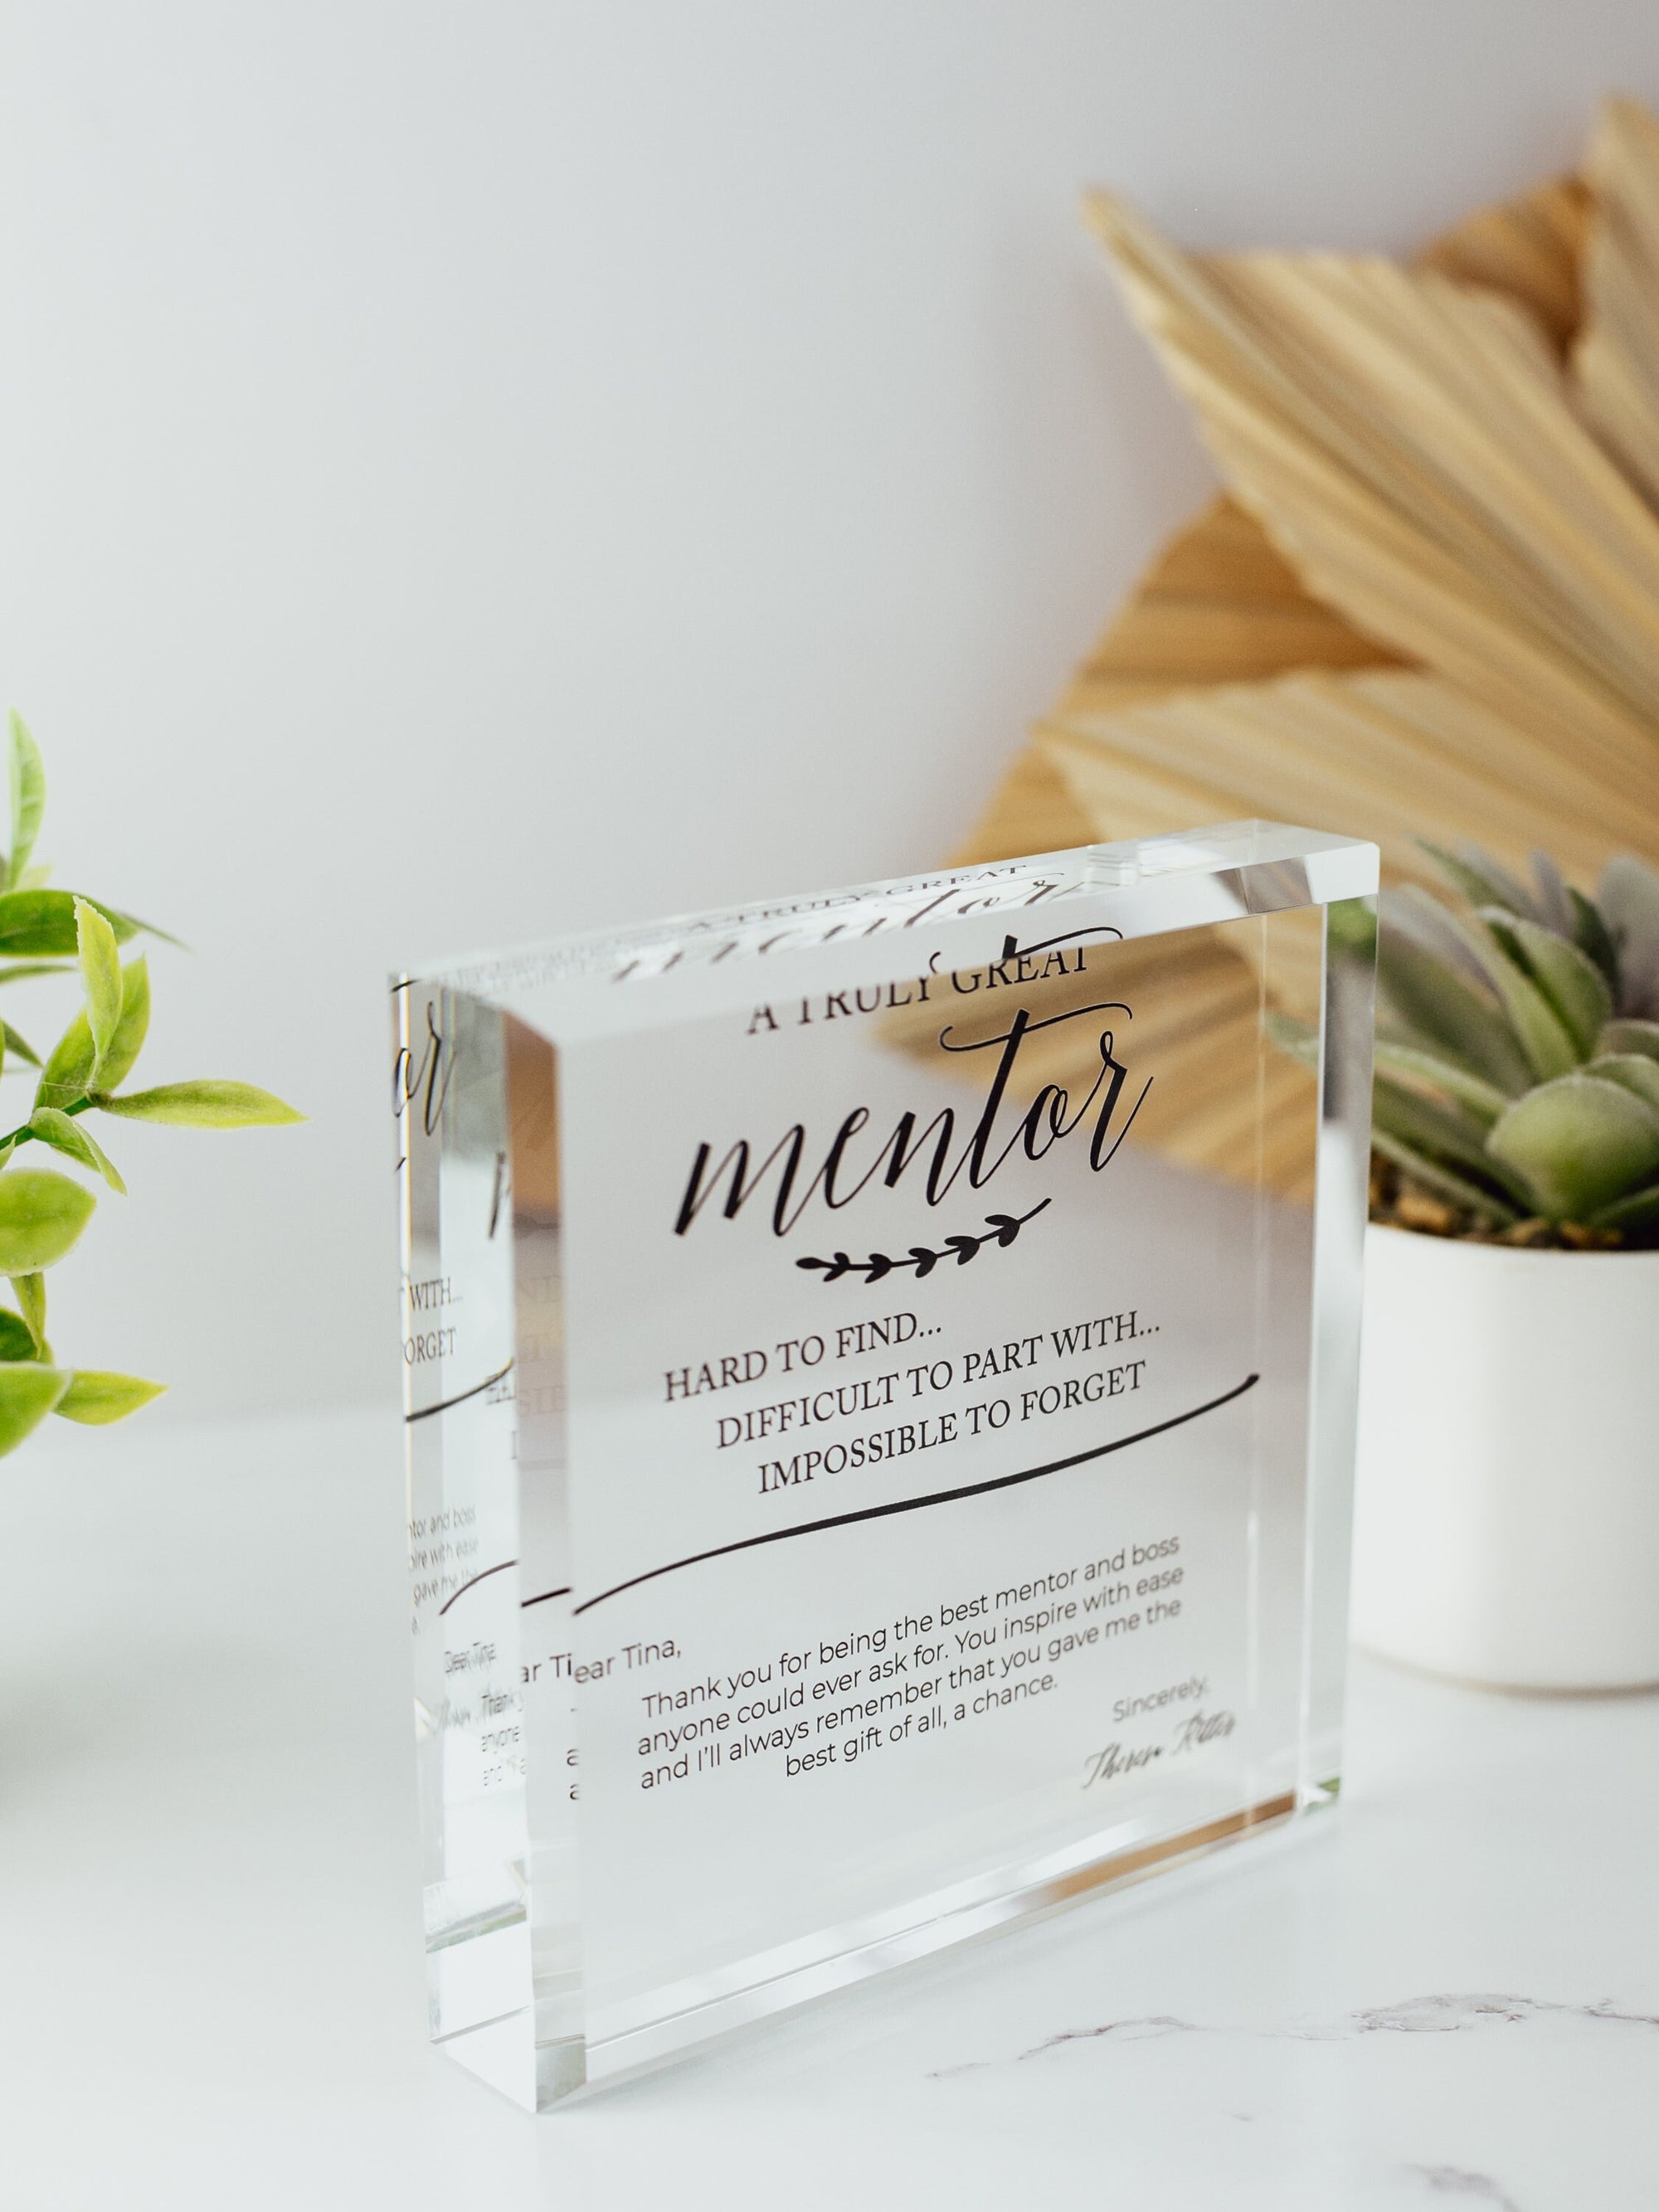 Truly Great Mentor Crystal Glass Plaque, for Employee Recognition, Life Coach Trophy, Appreciation Gift Plaque, Present from Staff, Boss Day